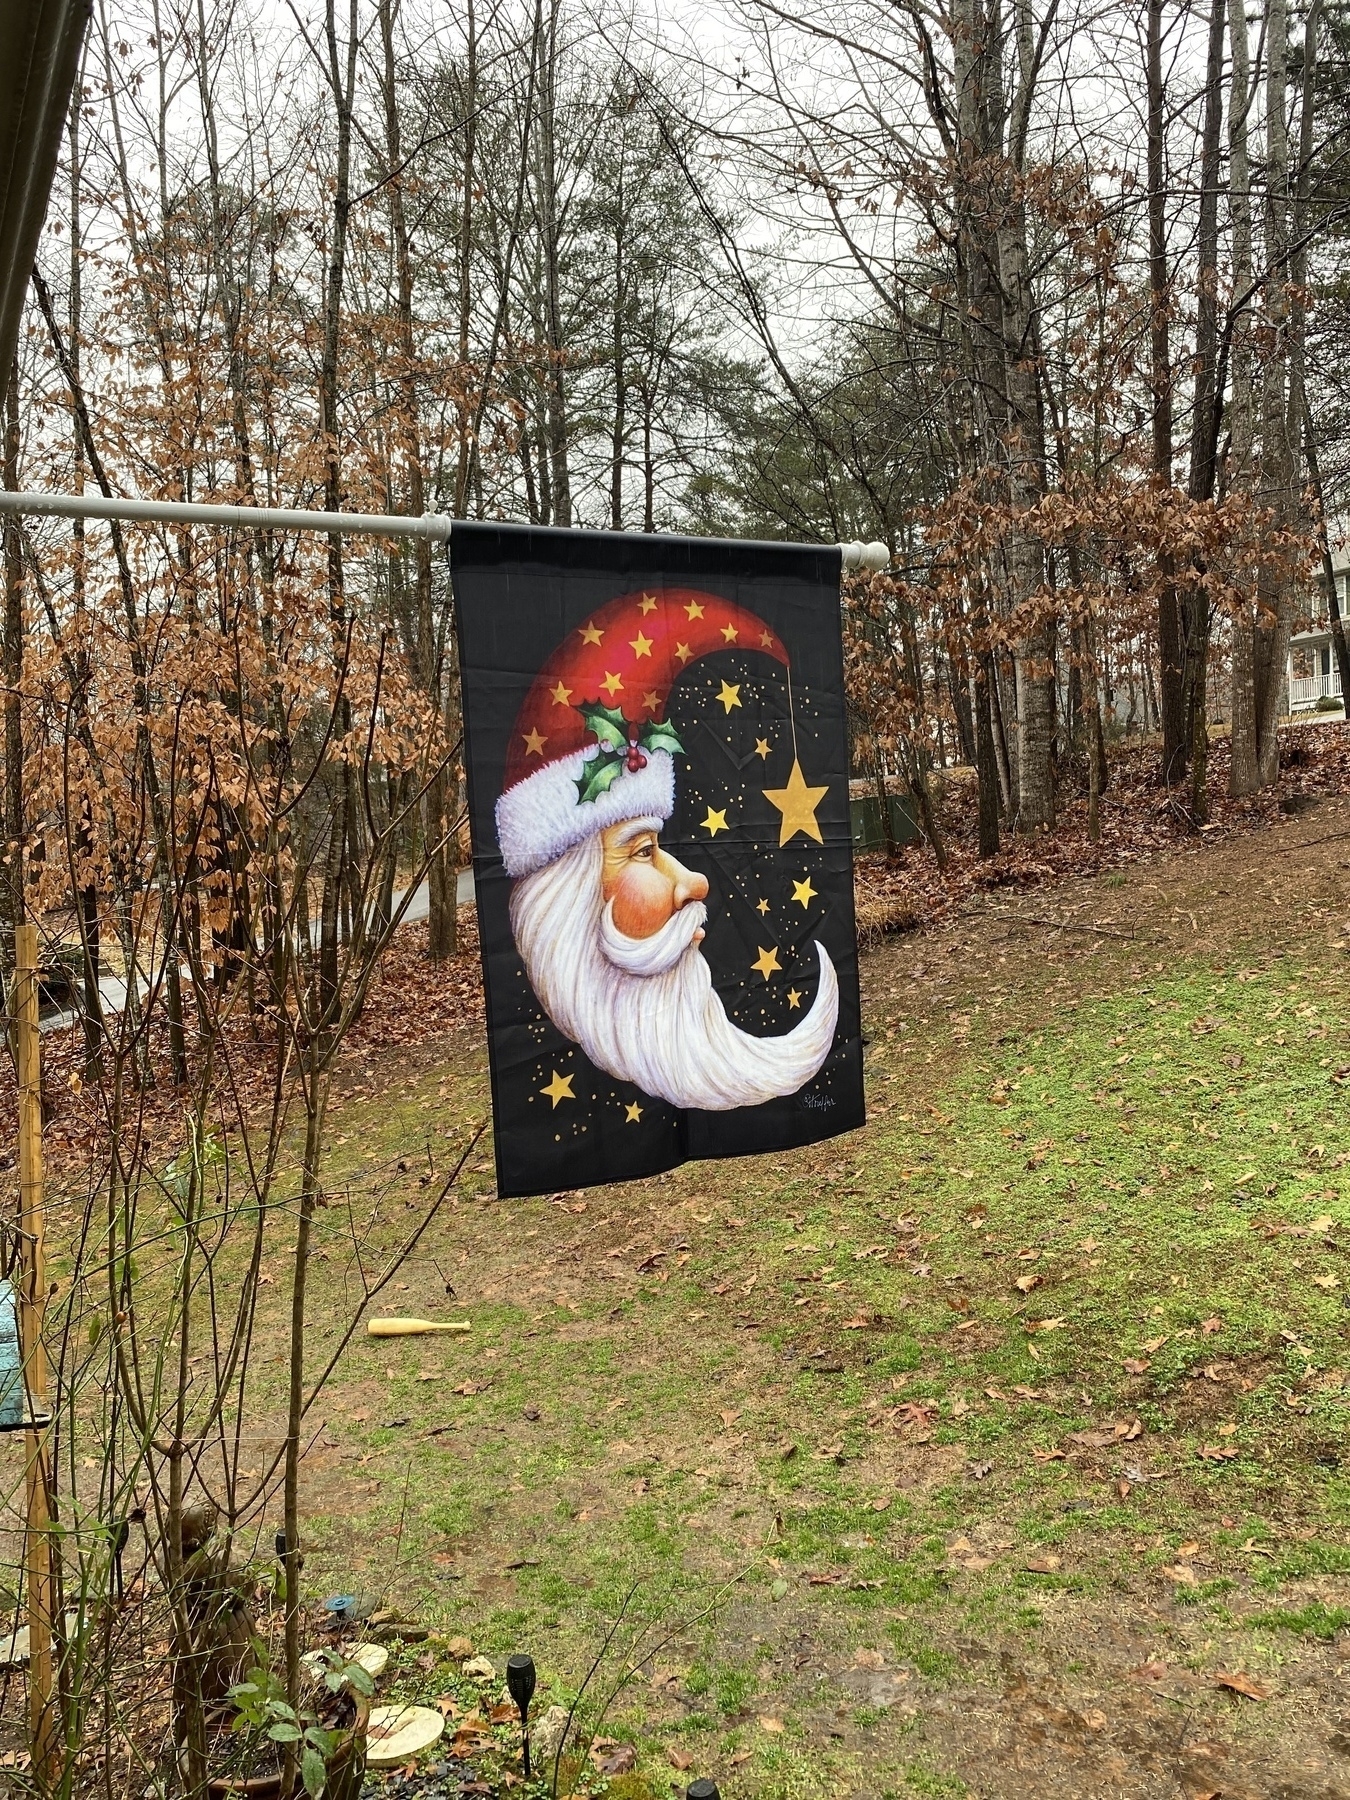 A picture of a flag with a Santa Claus shaped like a crescent moon.